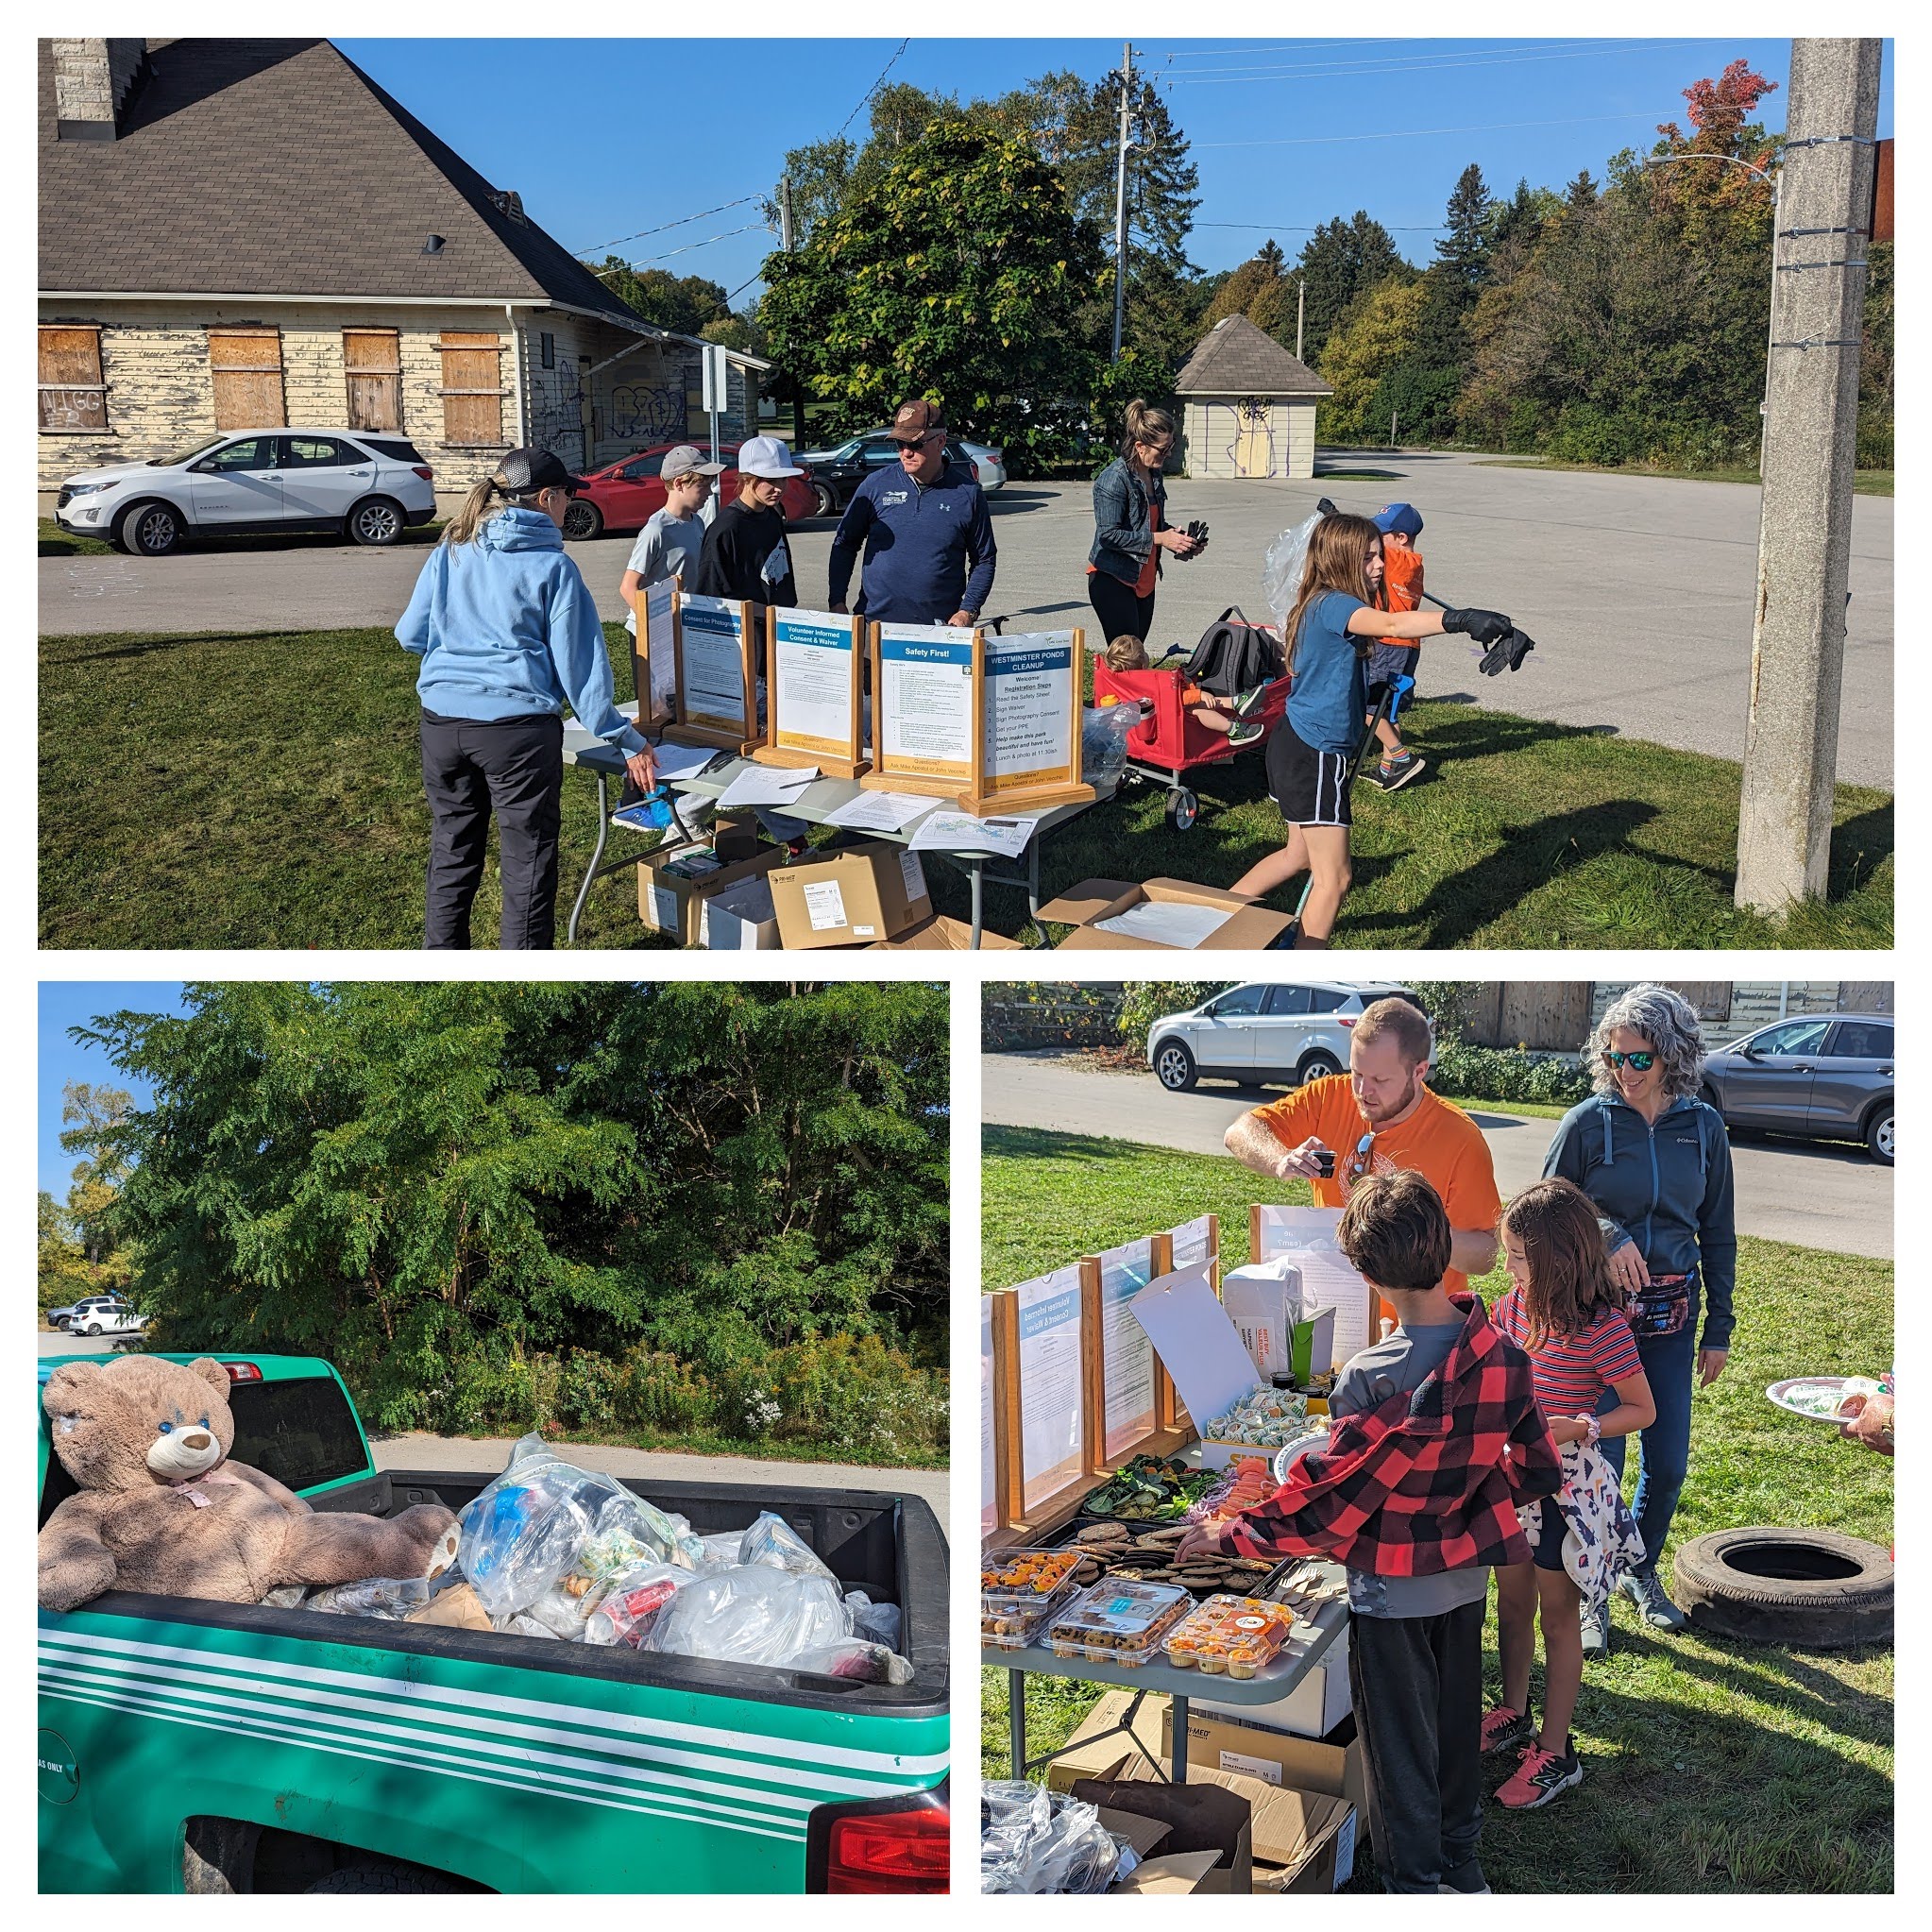 Collage of pictures from the event showing the signup table, the sponsored food from Daniels Health, and a pickup truck bed full of garbage that was collected during the cleanup